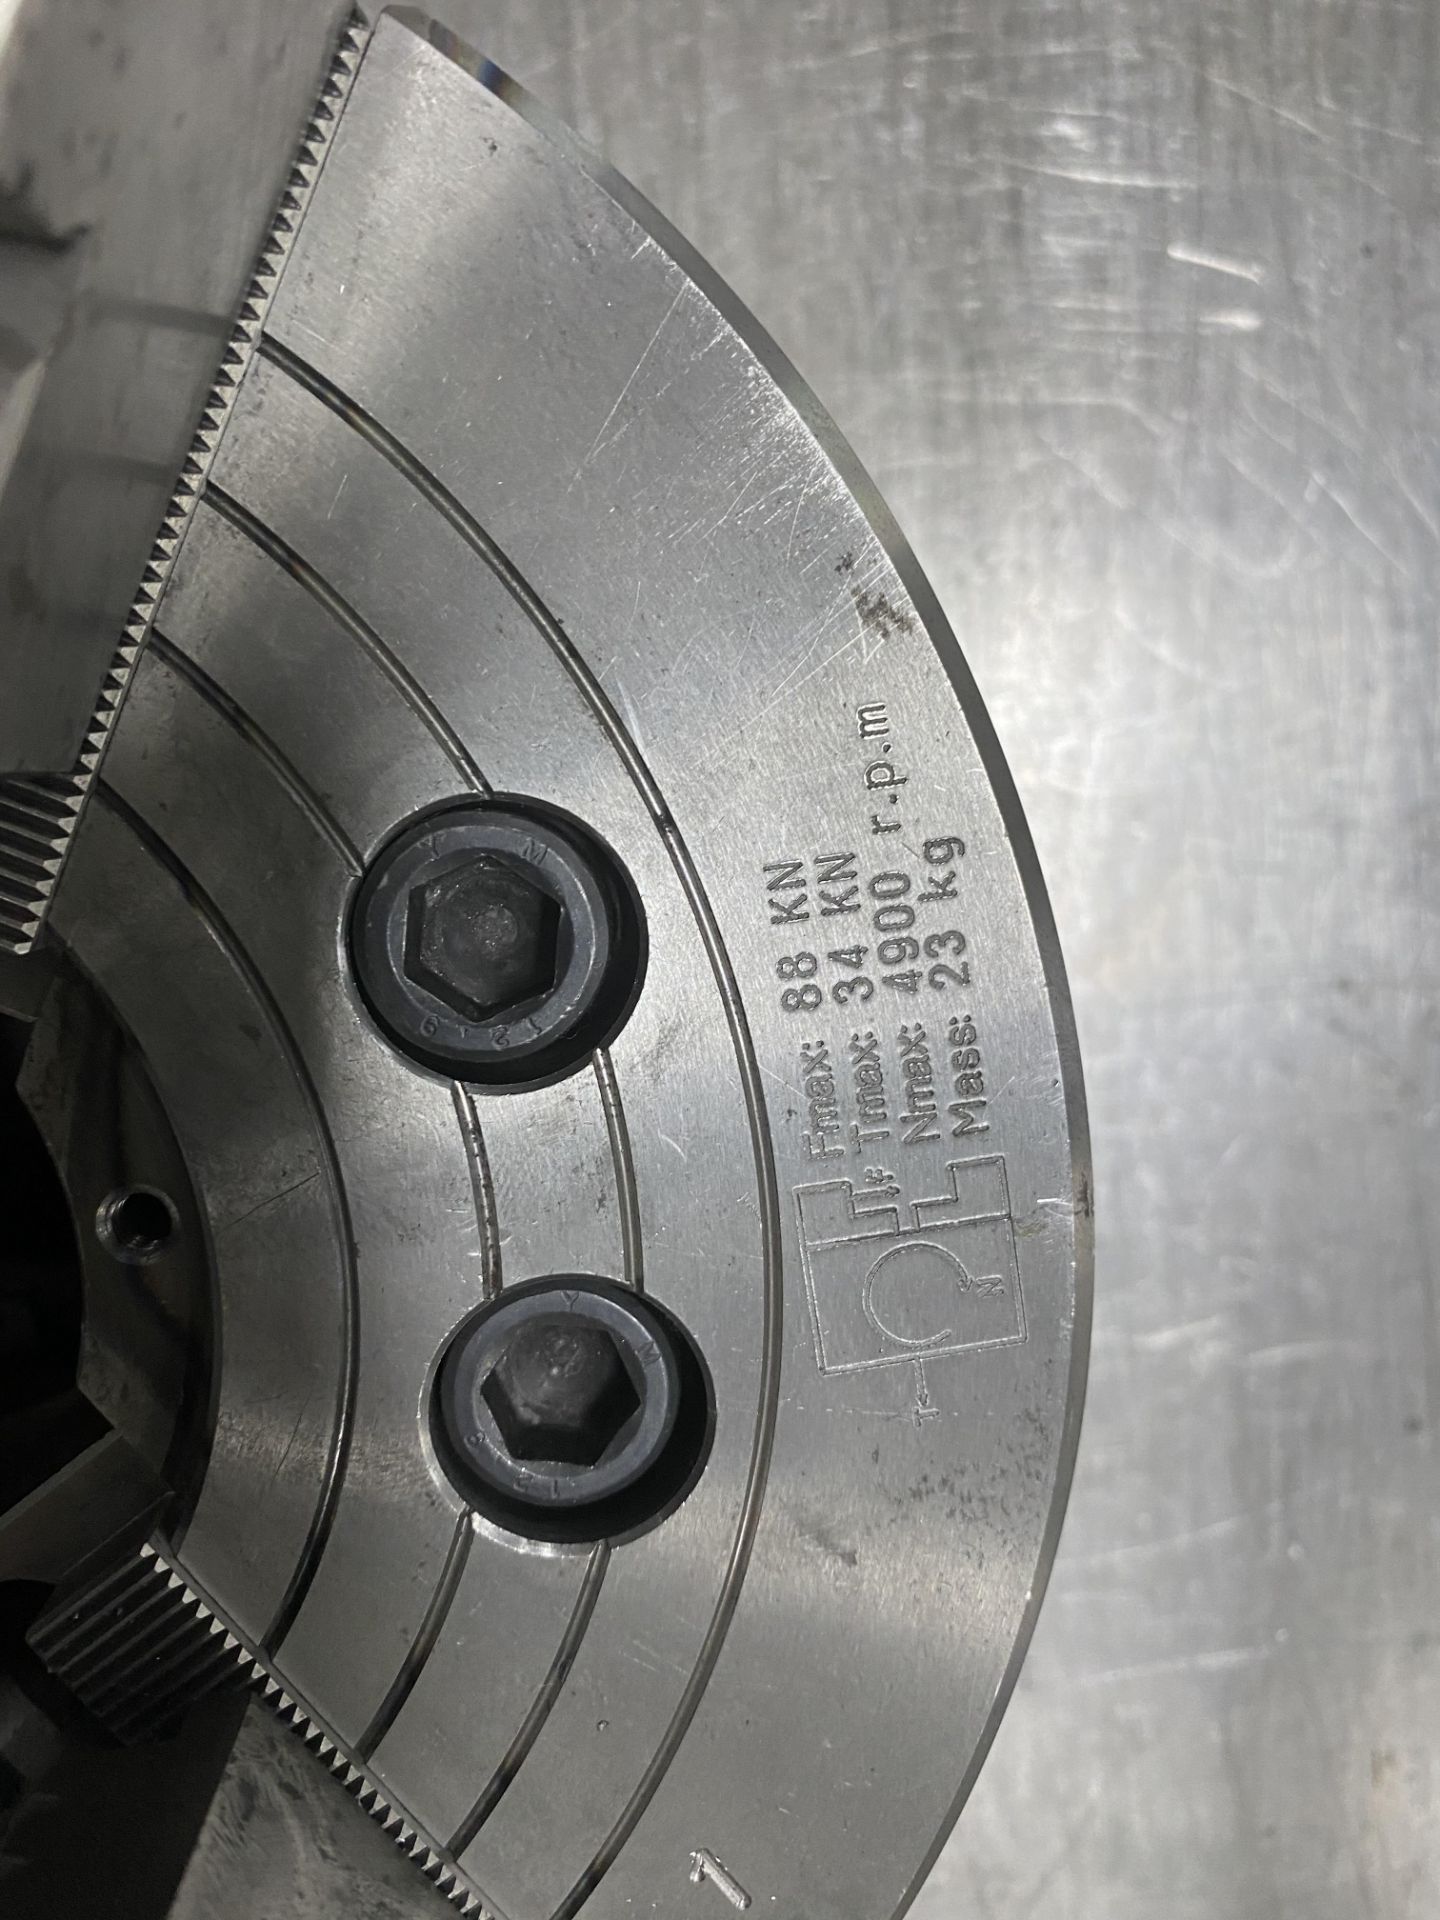 8" Auto Strong 3-Jaw Chuck - Image 3 of 5